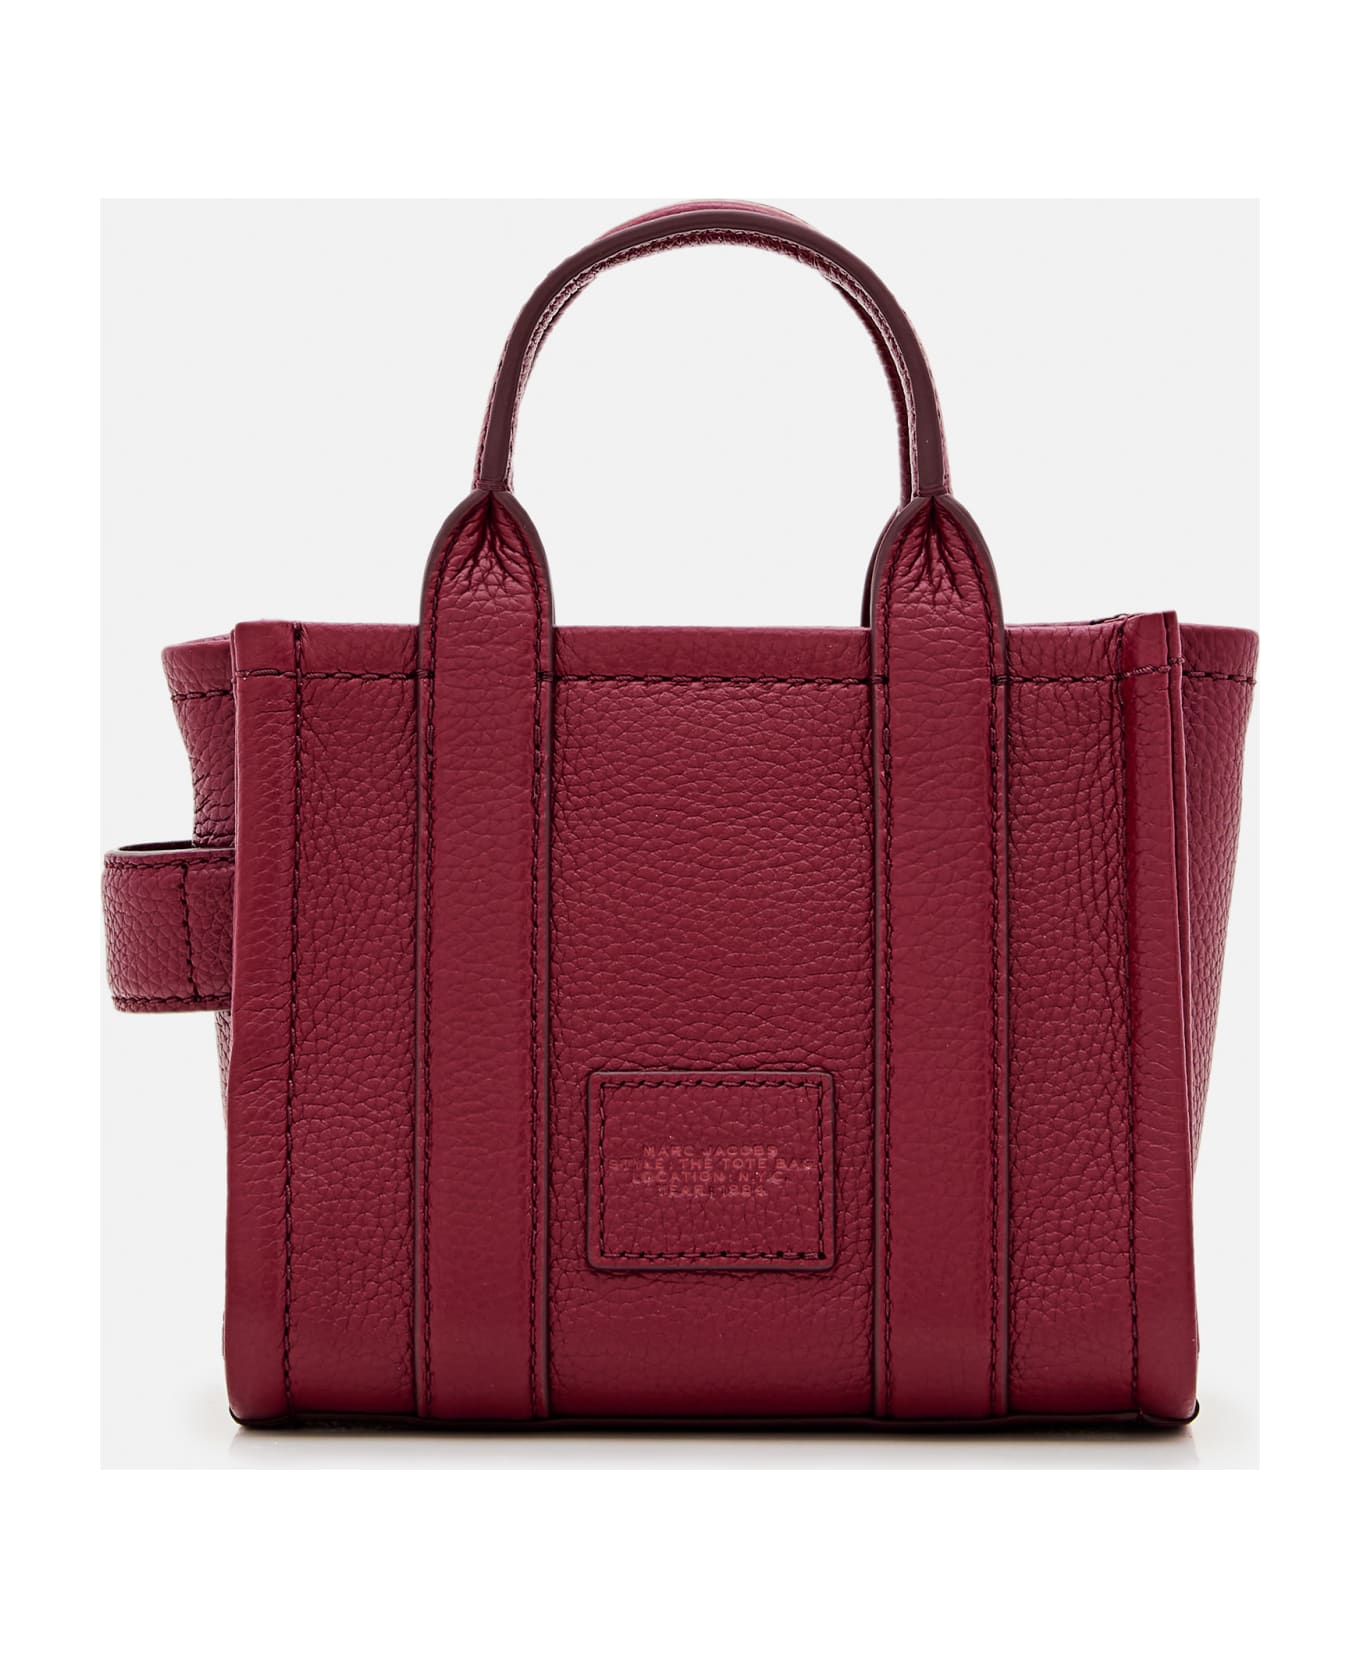 Marc Jacobs The Mini Leather Tote Bag - Red